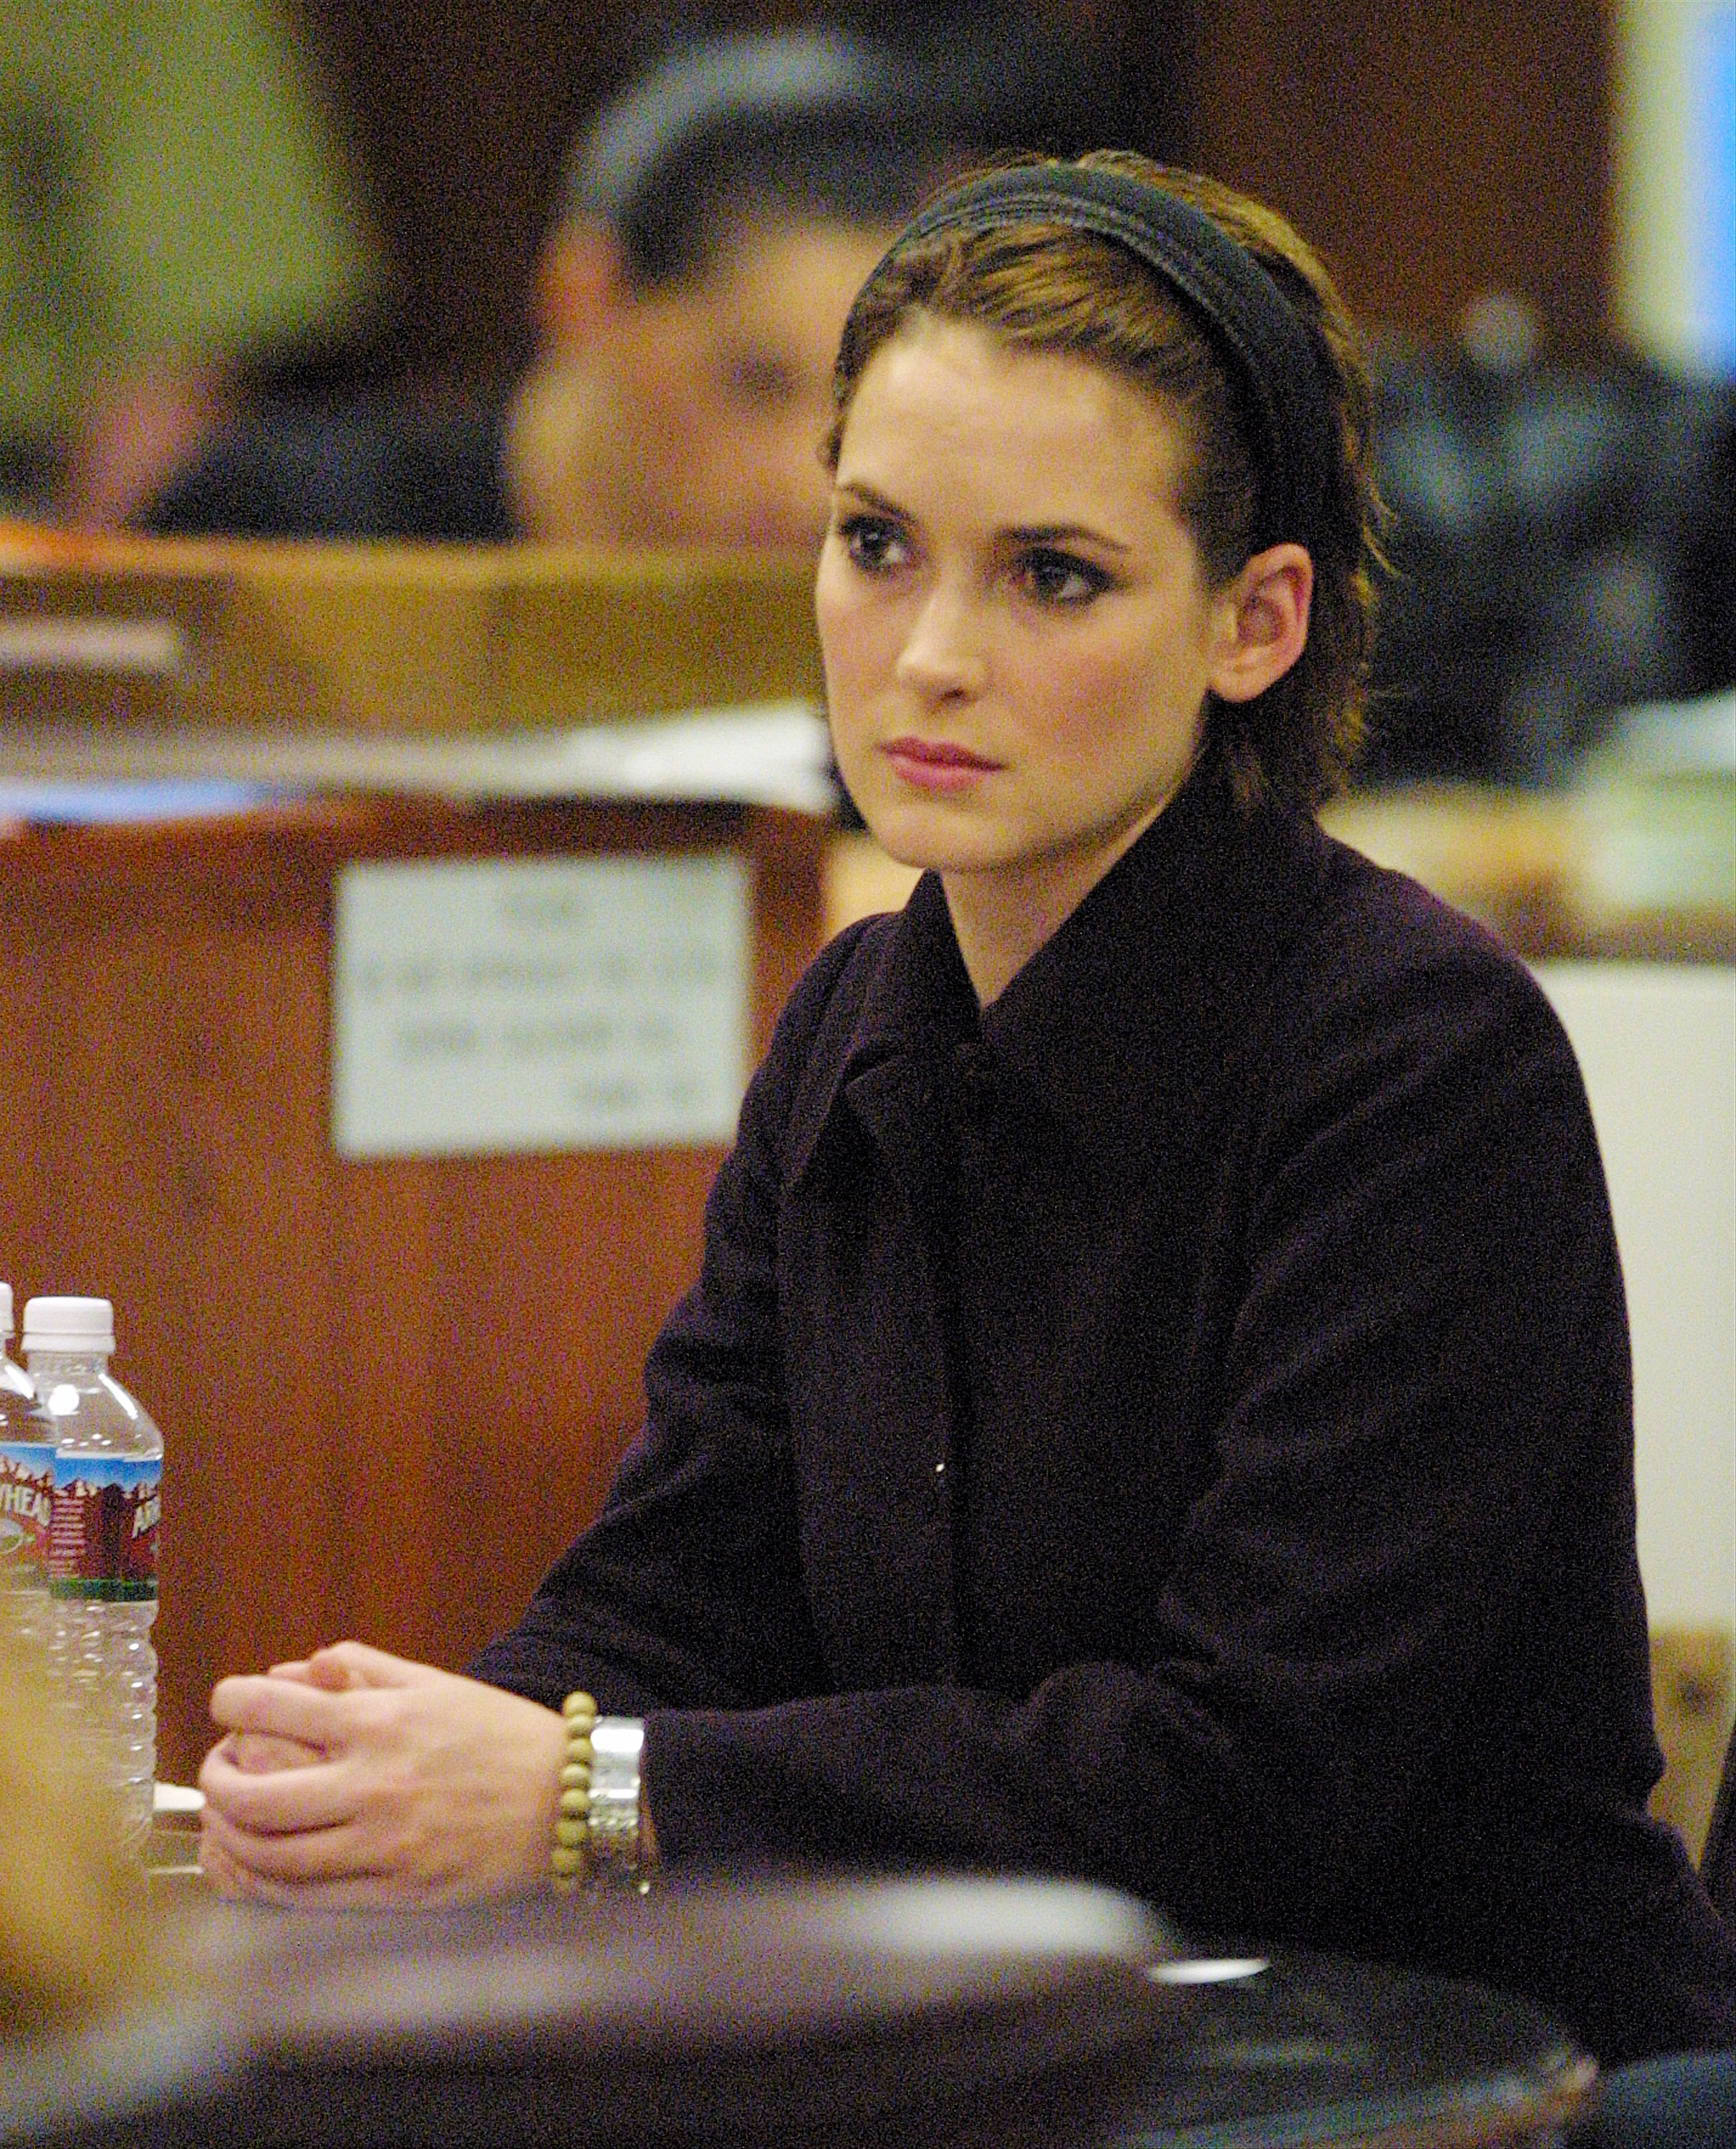 Winona Ryder in court